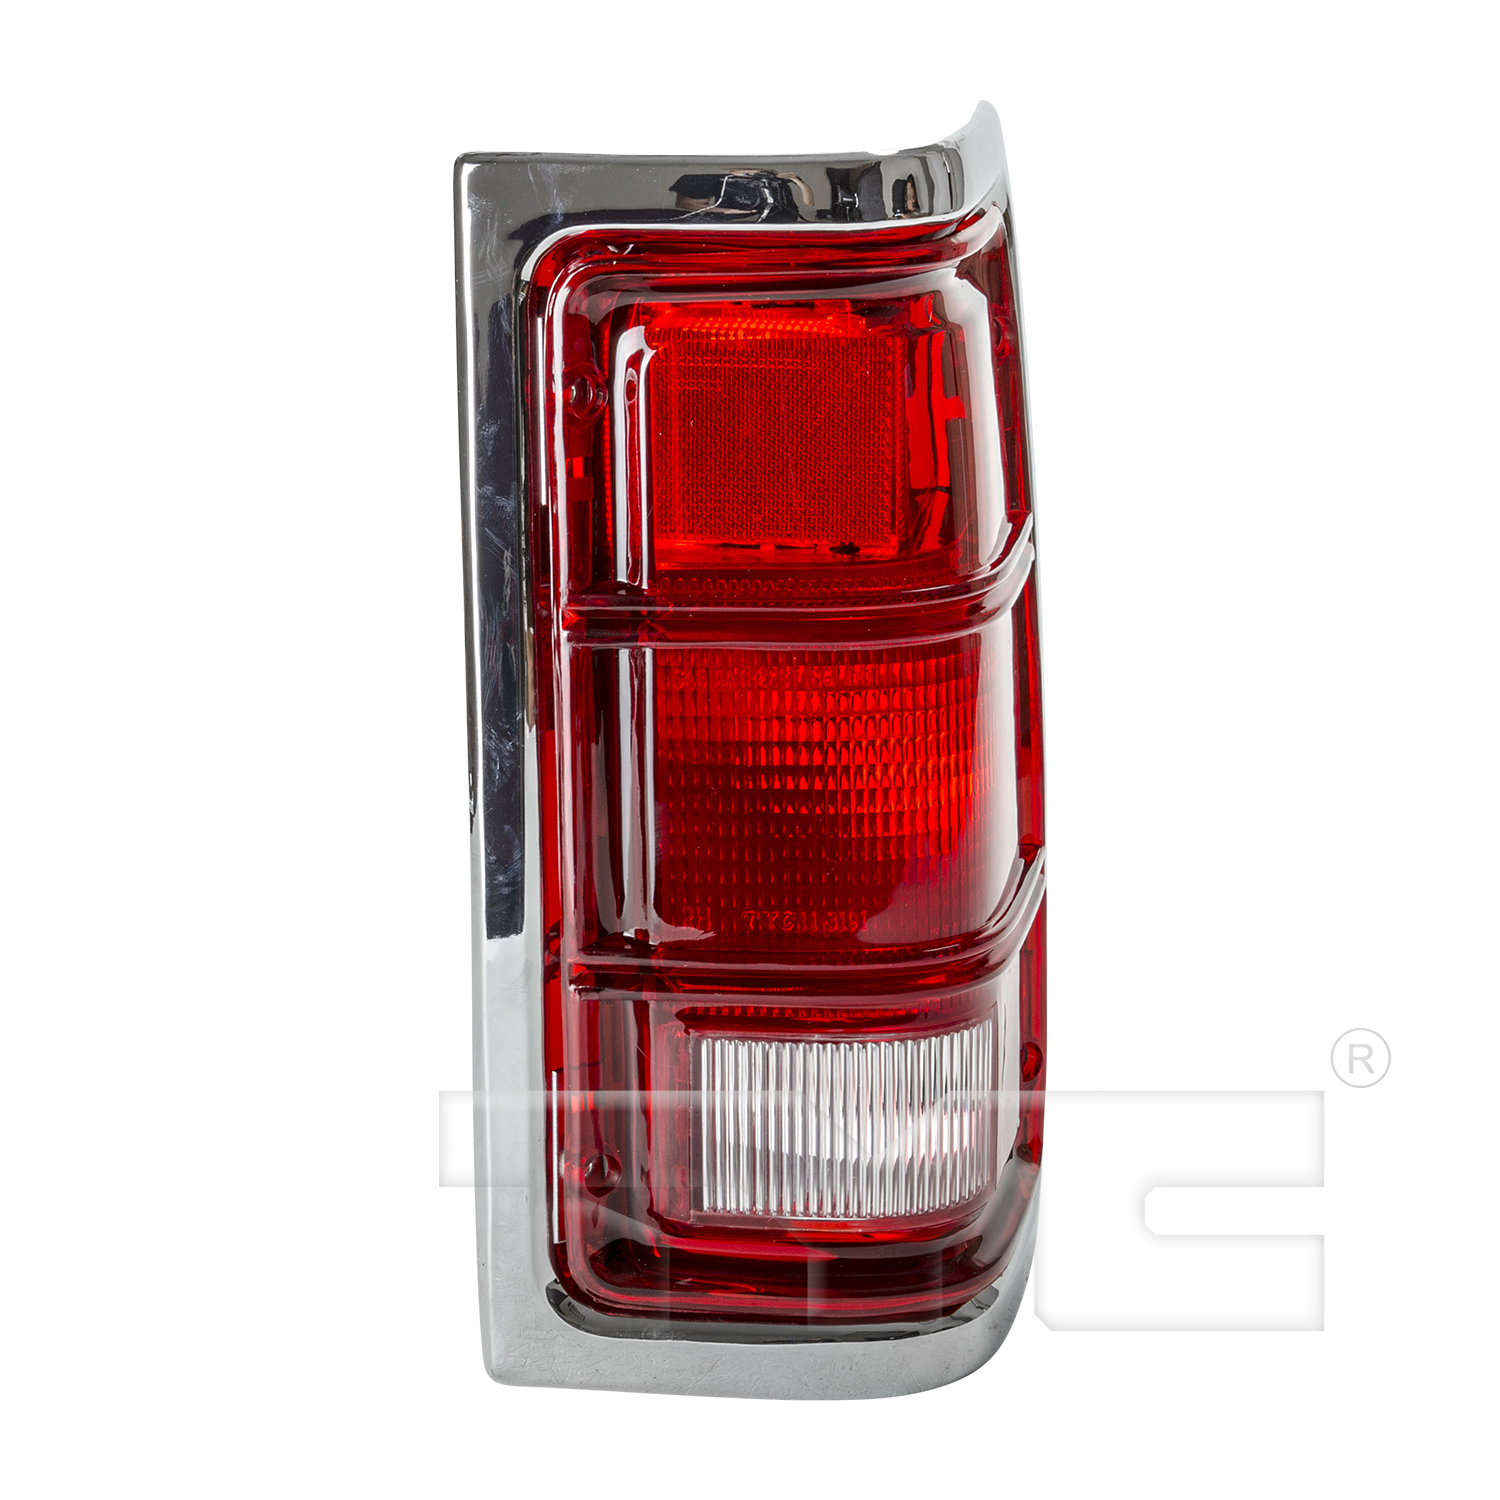 Aftermarket TAILLIGHTS for DODGE - W150, W150,87-91,RT Taillamp lens